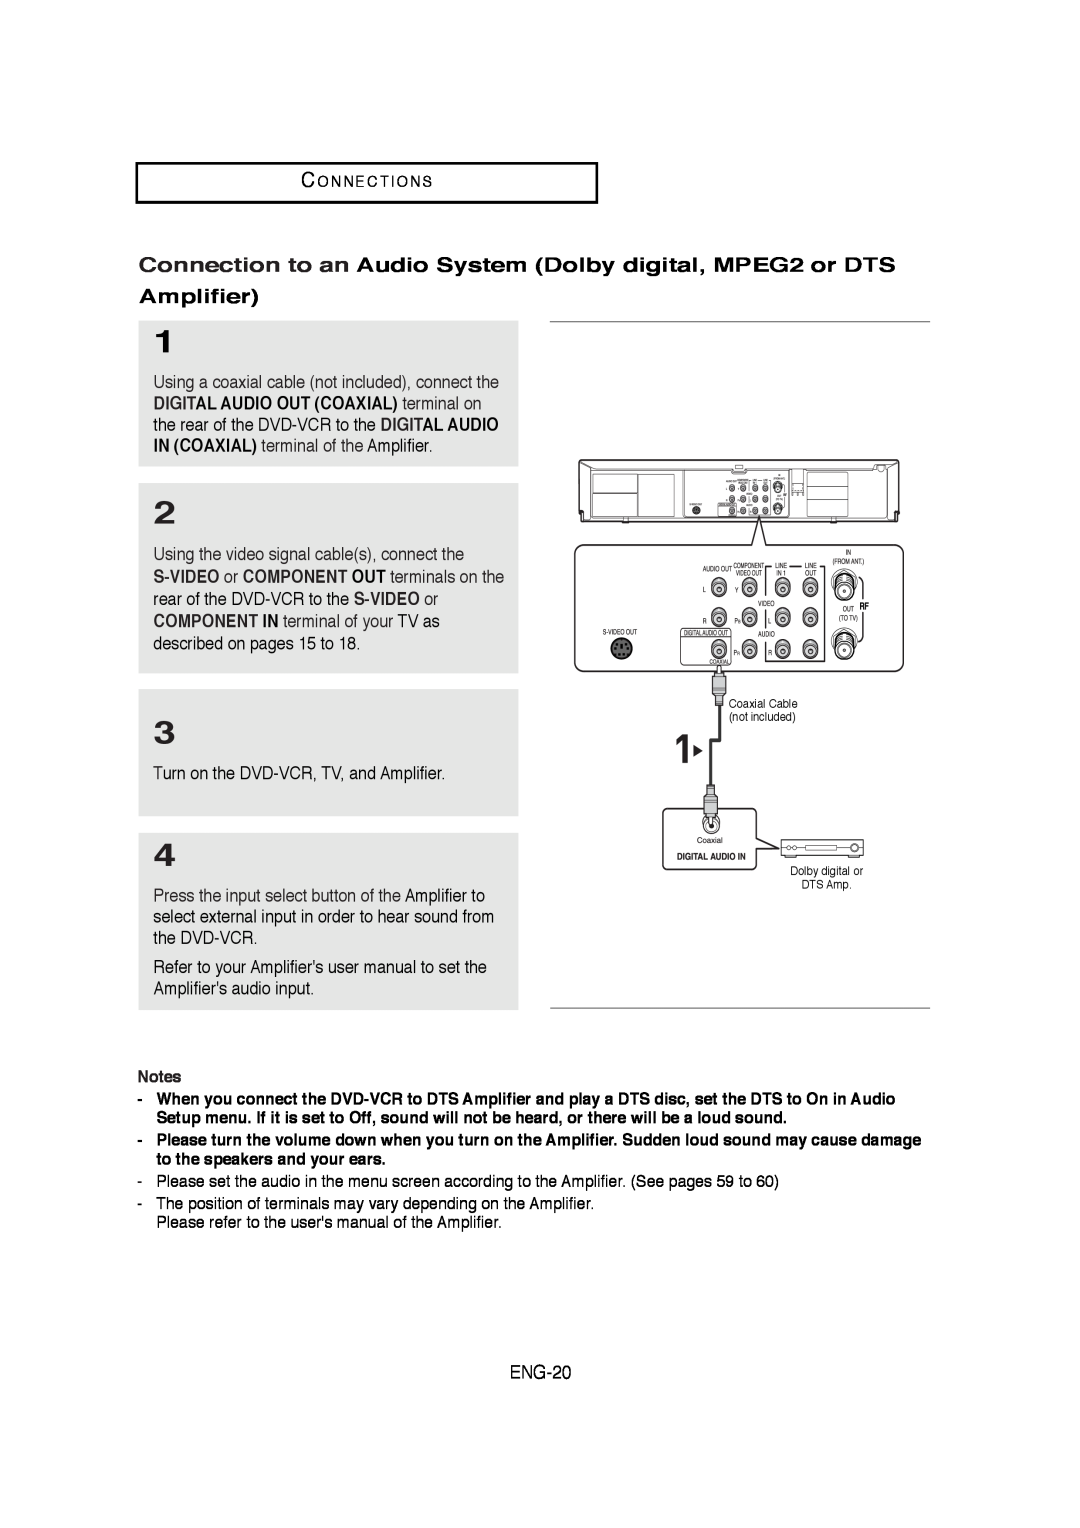 Samsung V6700-XAC, AK68-01304A Connection to an Audio System Dolby digital, MPEG2 or DTS, Amplifier, ENG-20 